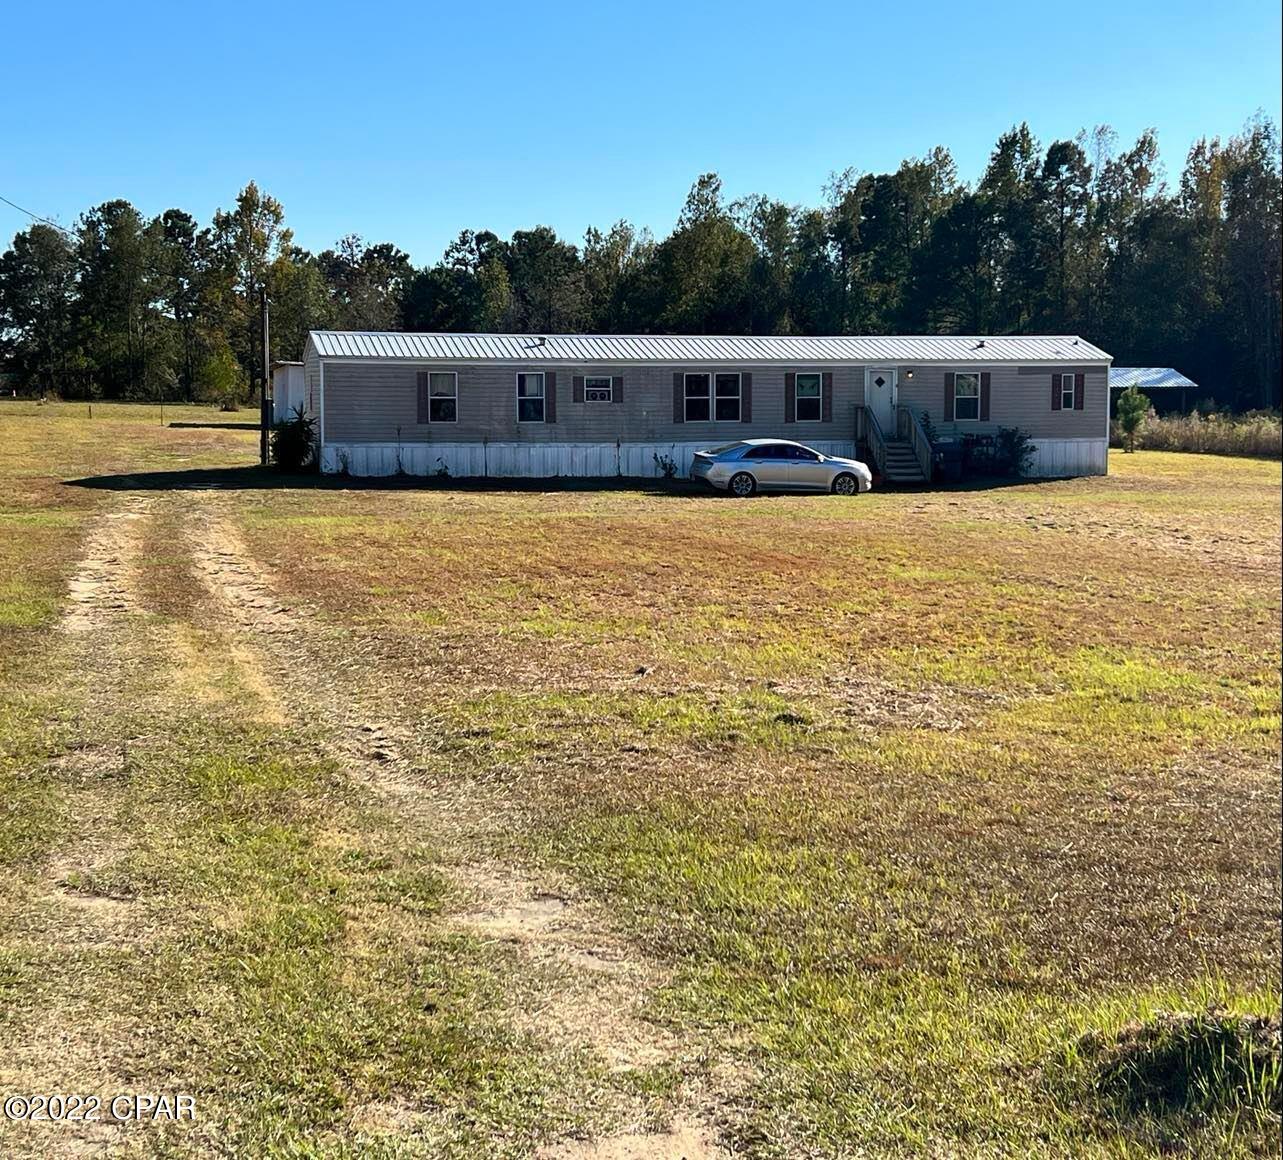 3 bedroom, 2 full bath 2003 Fleetwood single wide mobile home on 1.3 acres in Jacob City, Florida.  Septic installed 2021, city water.  Home was purchased from Fleetwood Homes in 2019 and Seller has lived there since then.  Jacob City is near I10 & Marianna.  Property's physical address is in Jacob City with address of Cottondale.  Marianna is approximately 20 minutes from home.   There are 2 outbuildings (sheds) behind mobile home measuring 1) 42x12 and 2) 33x12.